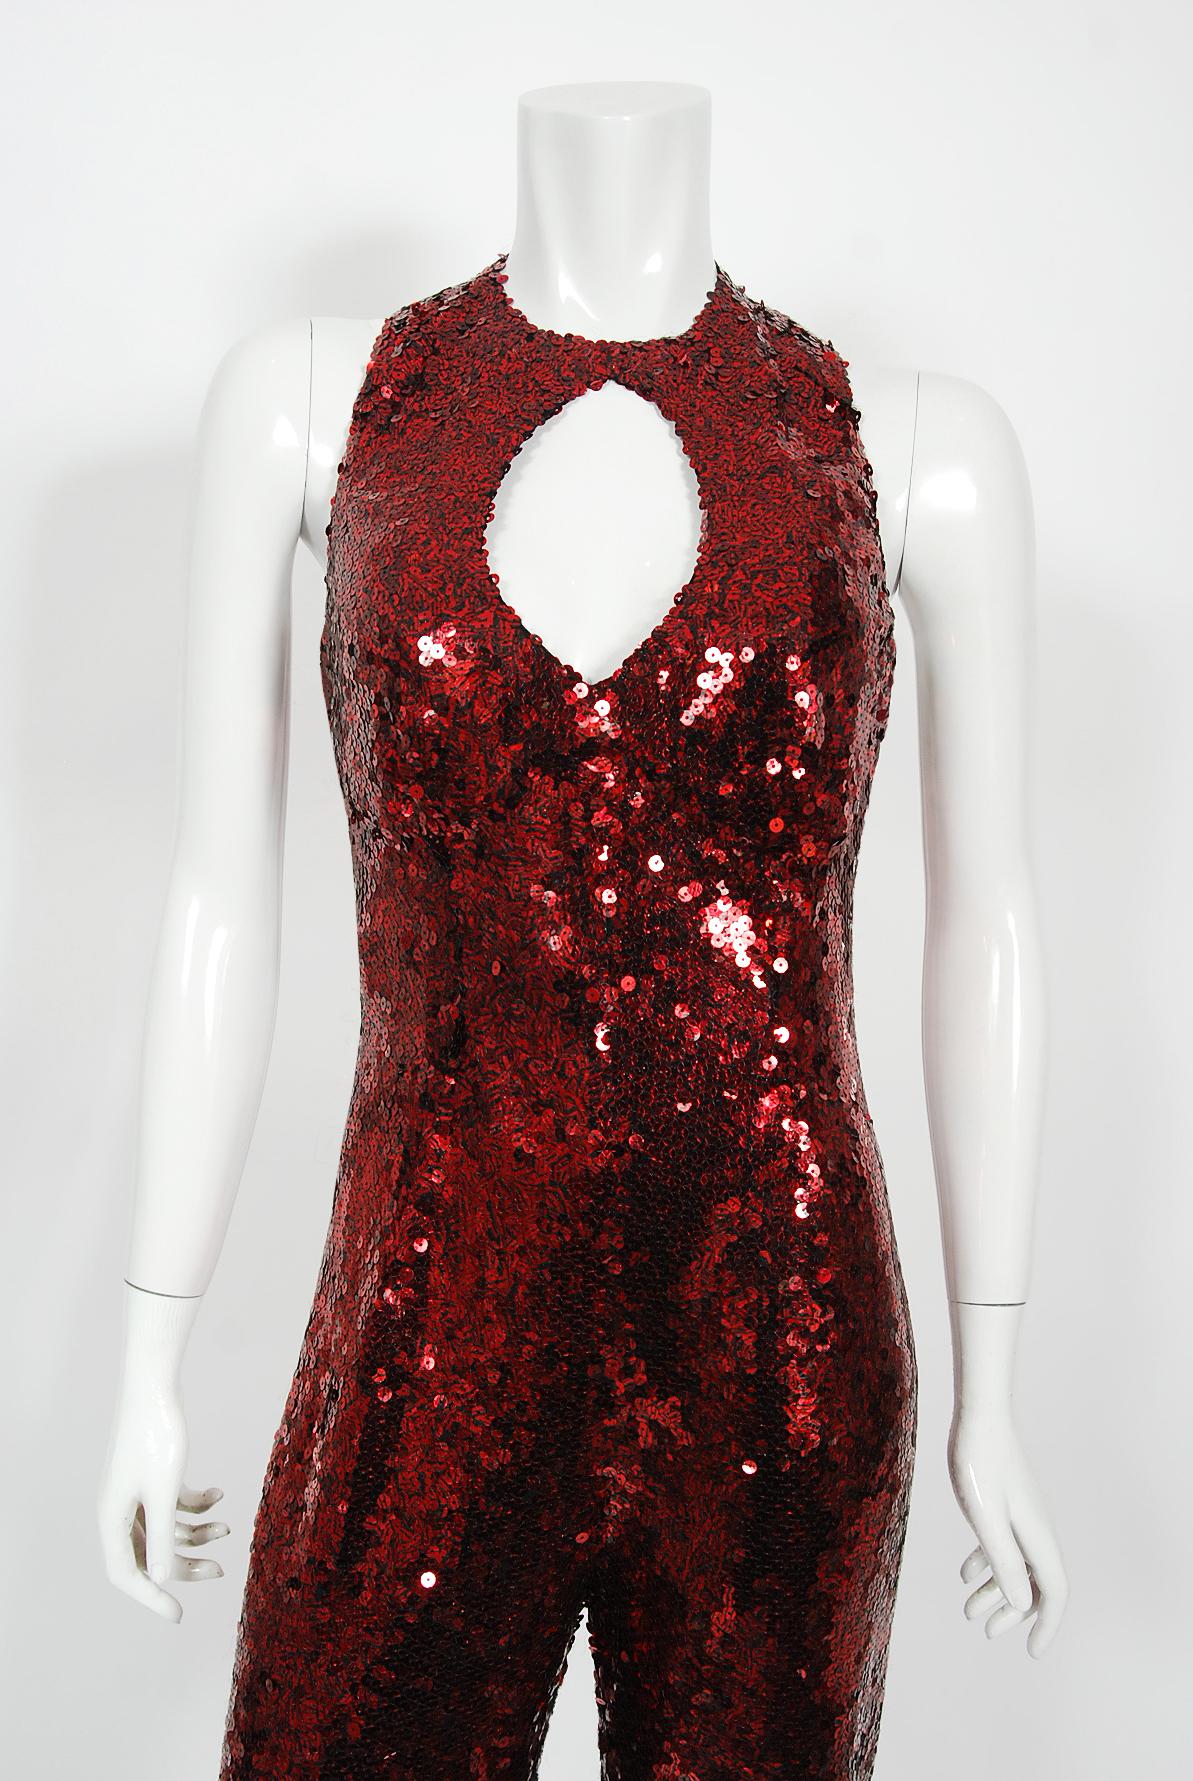 A sensational late 1970's red sequin stretch-knit jumpsuit made by Barbara Matera for one of Liza Minnelli's dancers! This rare stage costume comes complete with signed Certificate of Authenticity from Liza Minnelli herself. The designer Barbara